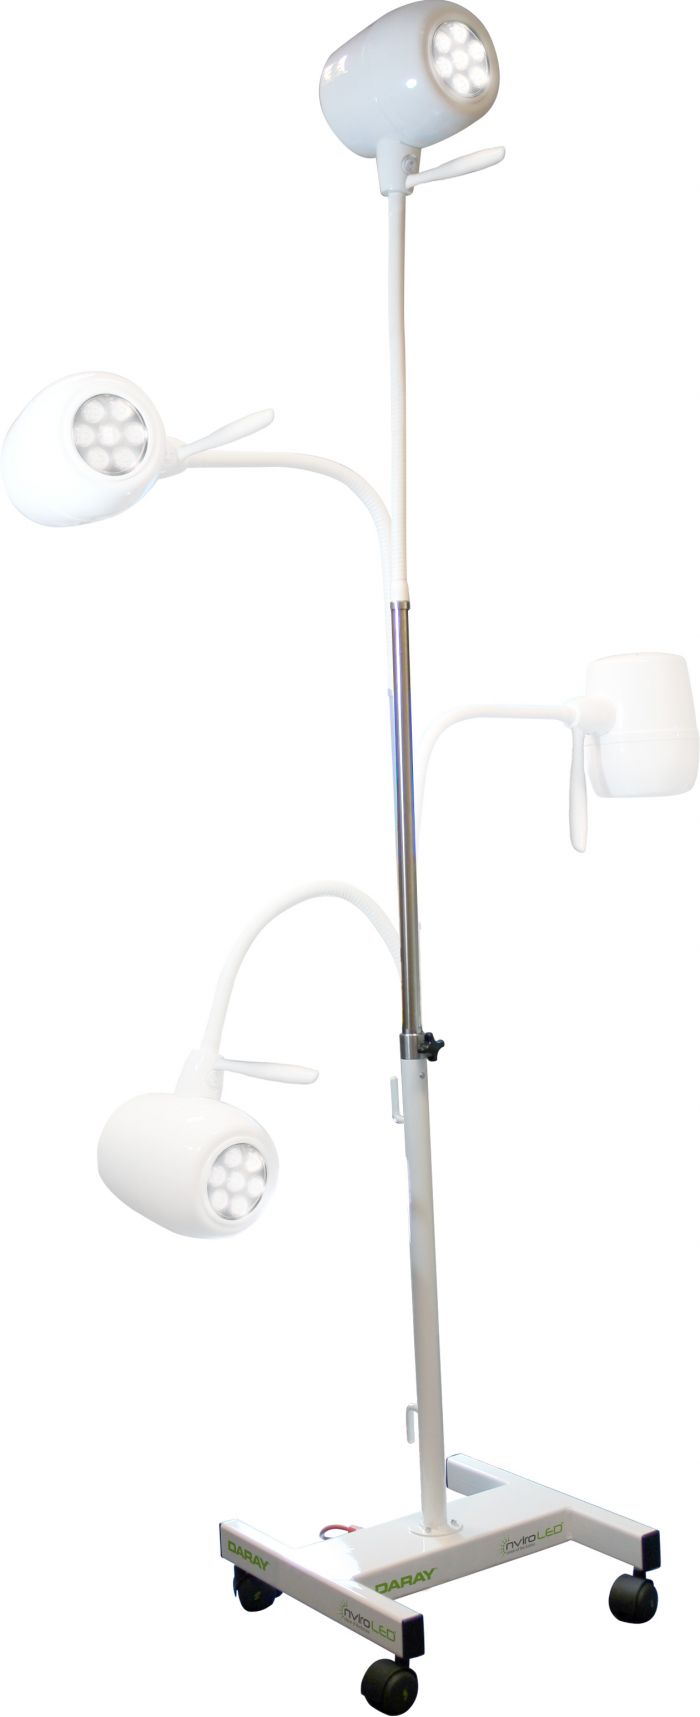 Daray X350 LED Examination Light - Mobile Mounted with Flexible Goose Neck & Telescopic Upstand - (Single)